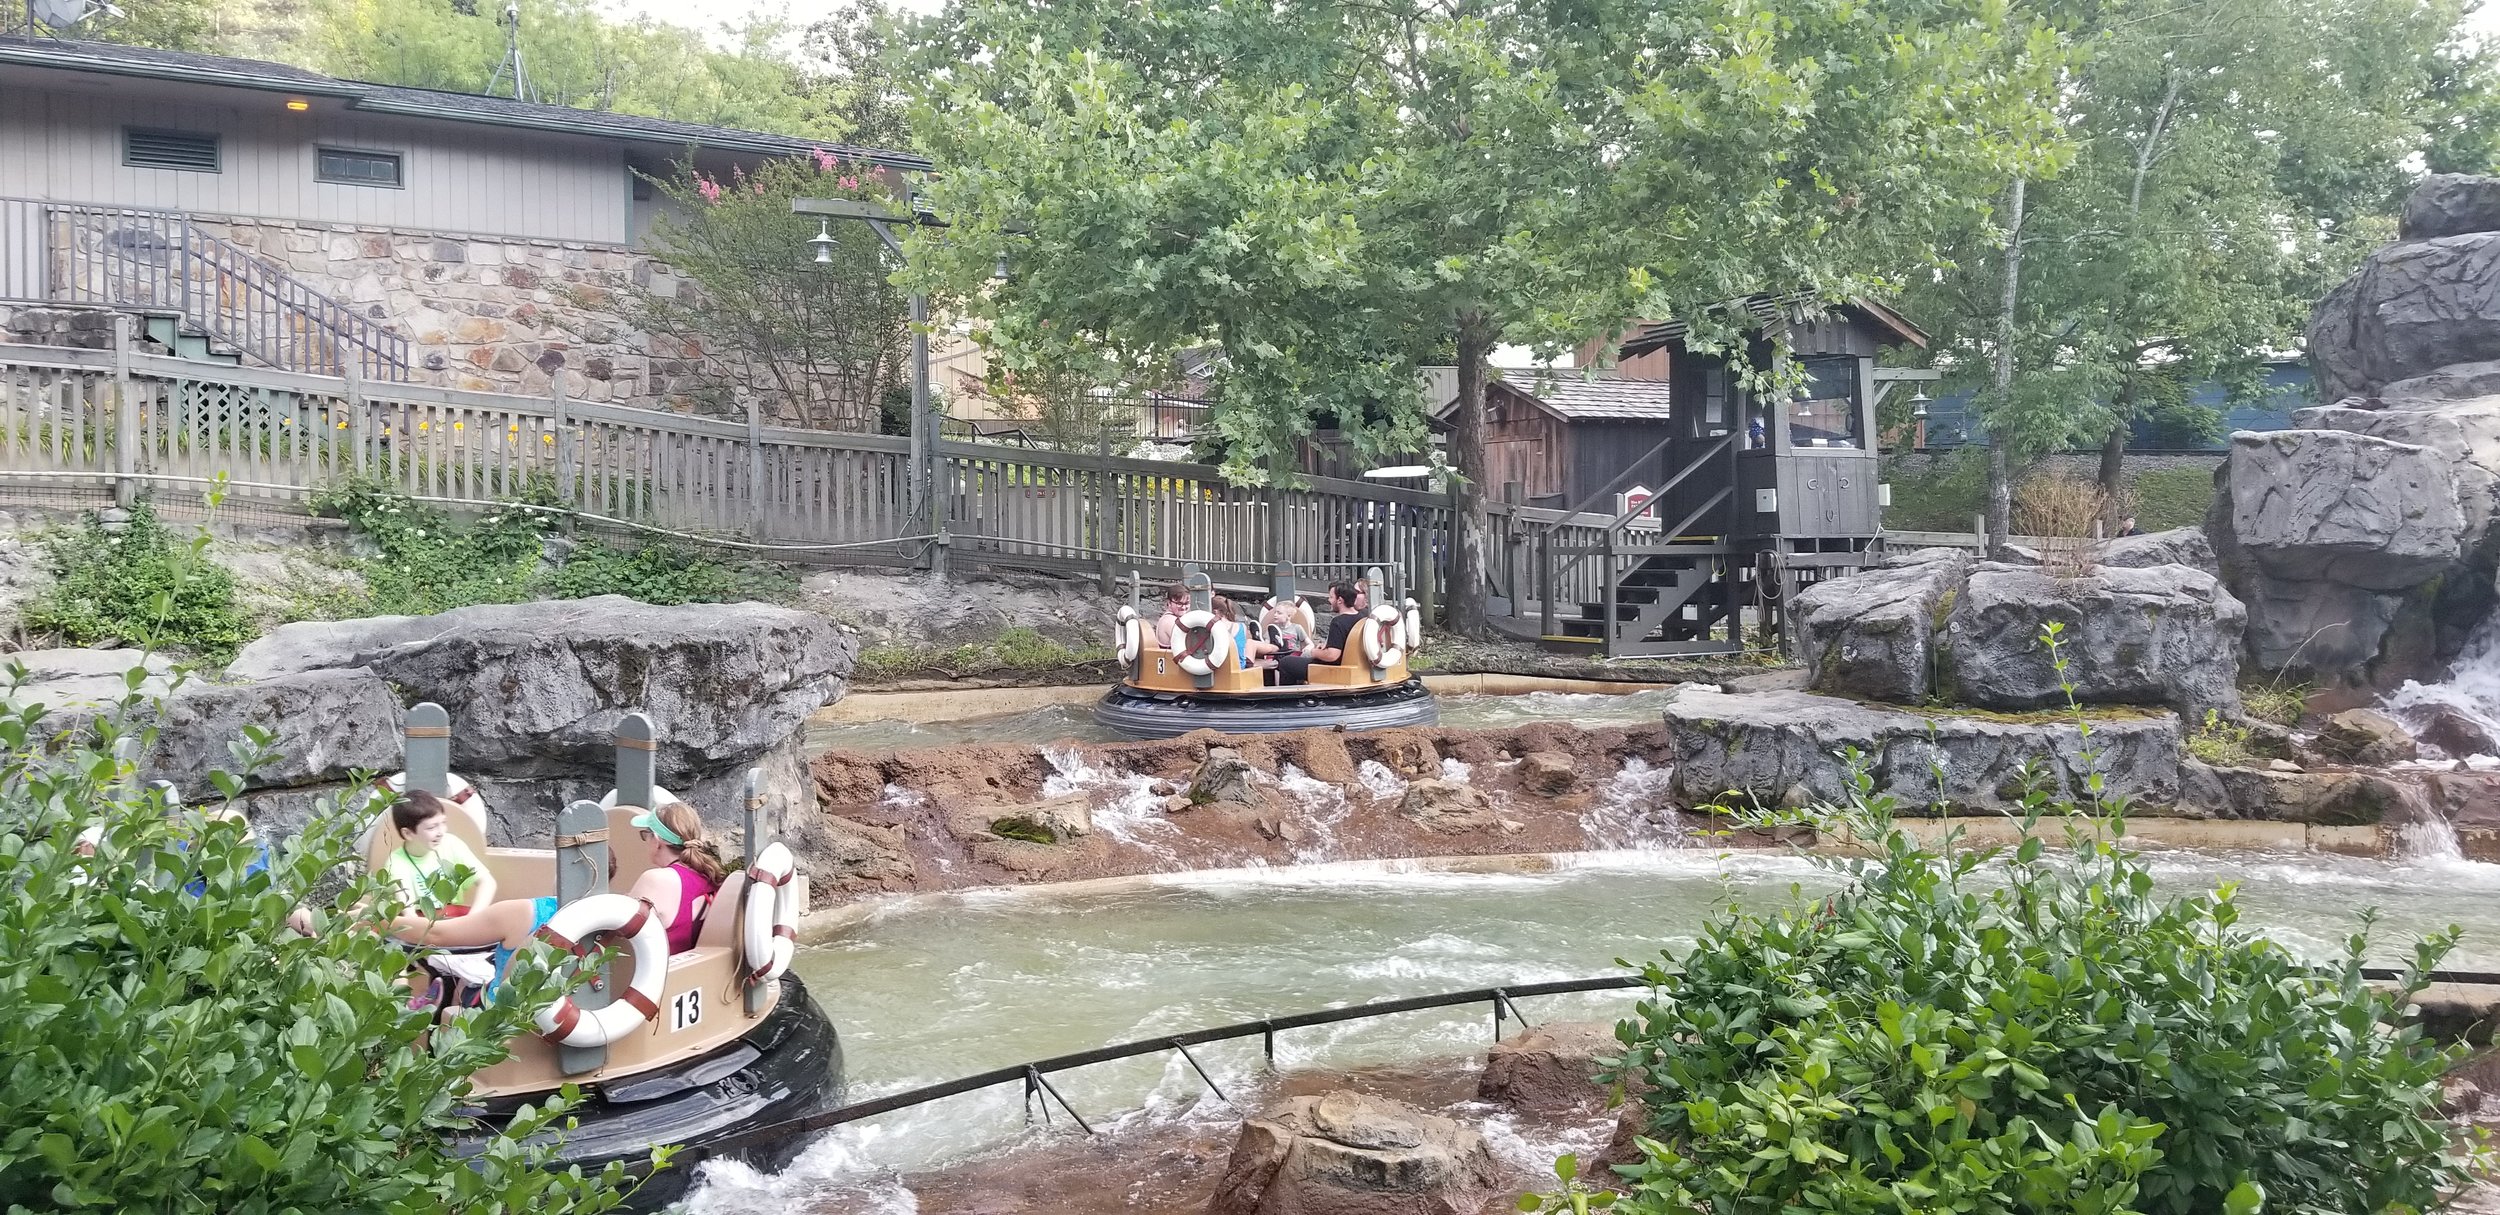  The River Rampage was the first ride added when the park transformed from Silver Dollar City to Dollywood. 